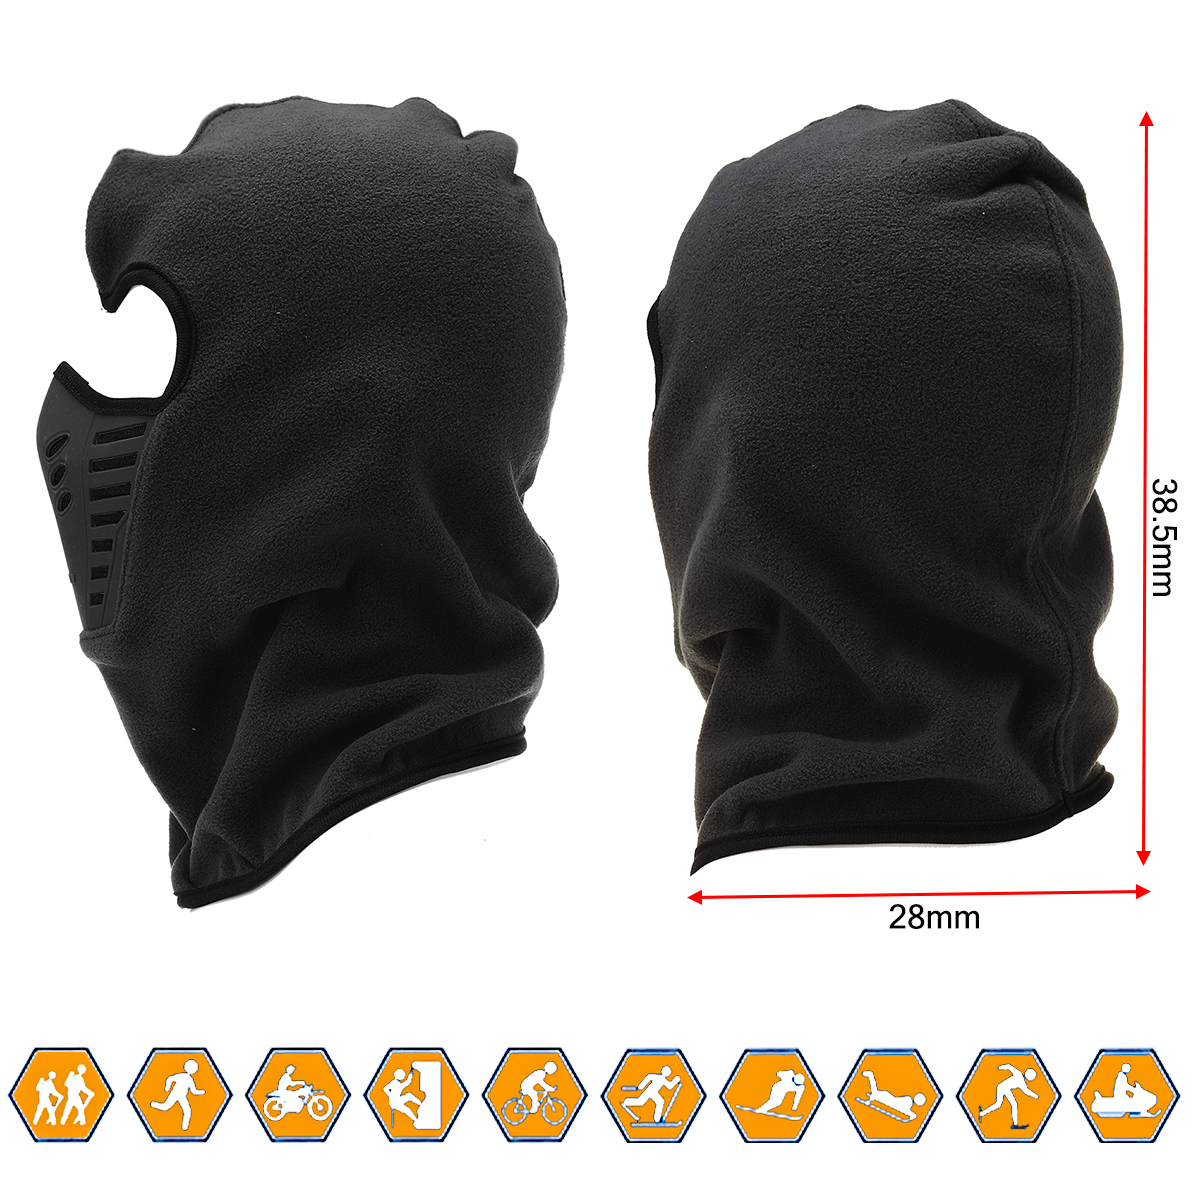 Tchibo Thermo-Fleece Face Covering 